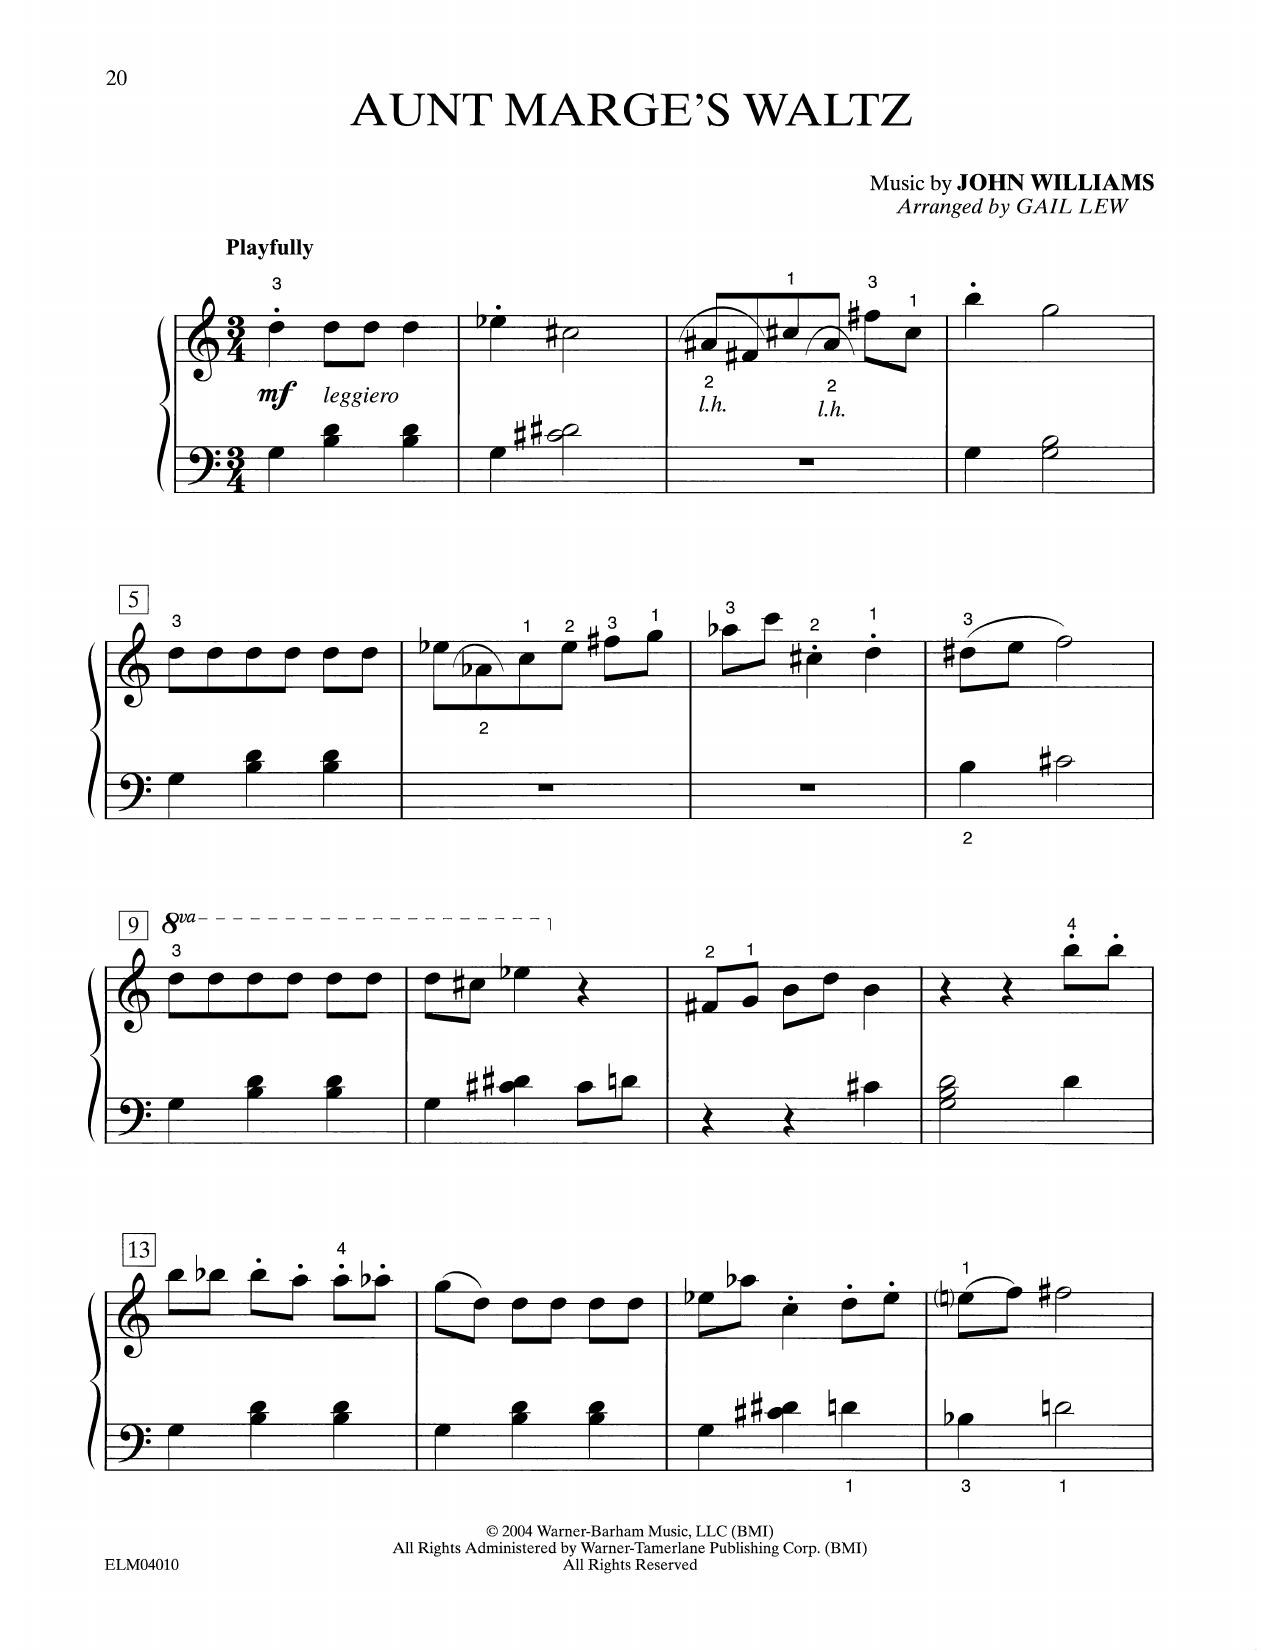 Download John Williams Aunt Marge's Waltz (from Harry Potter) Sheet Music